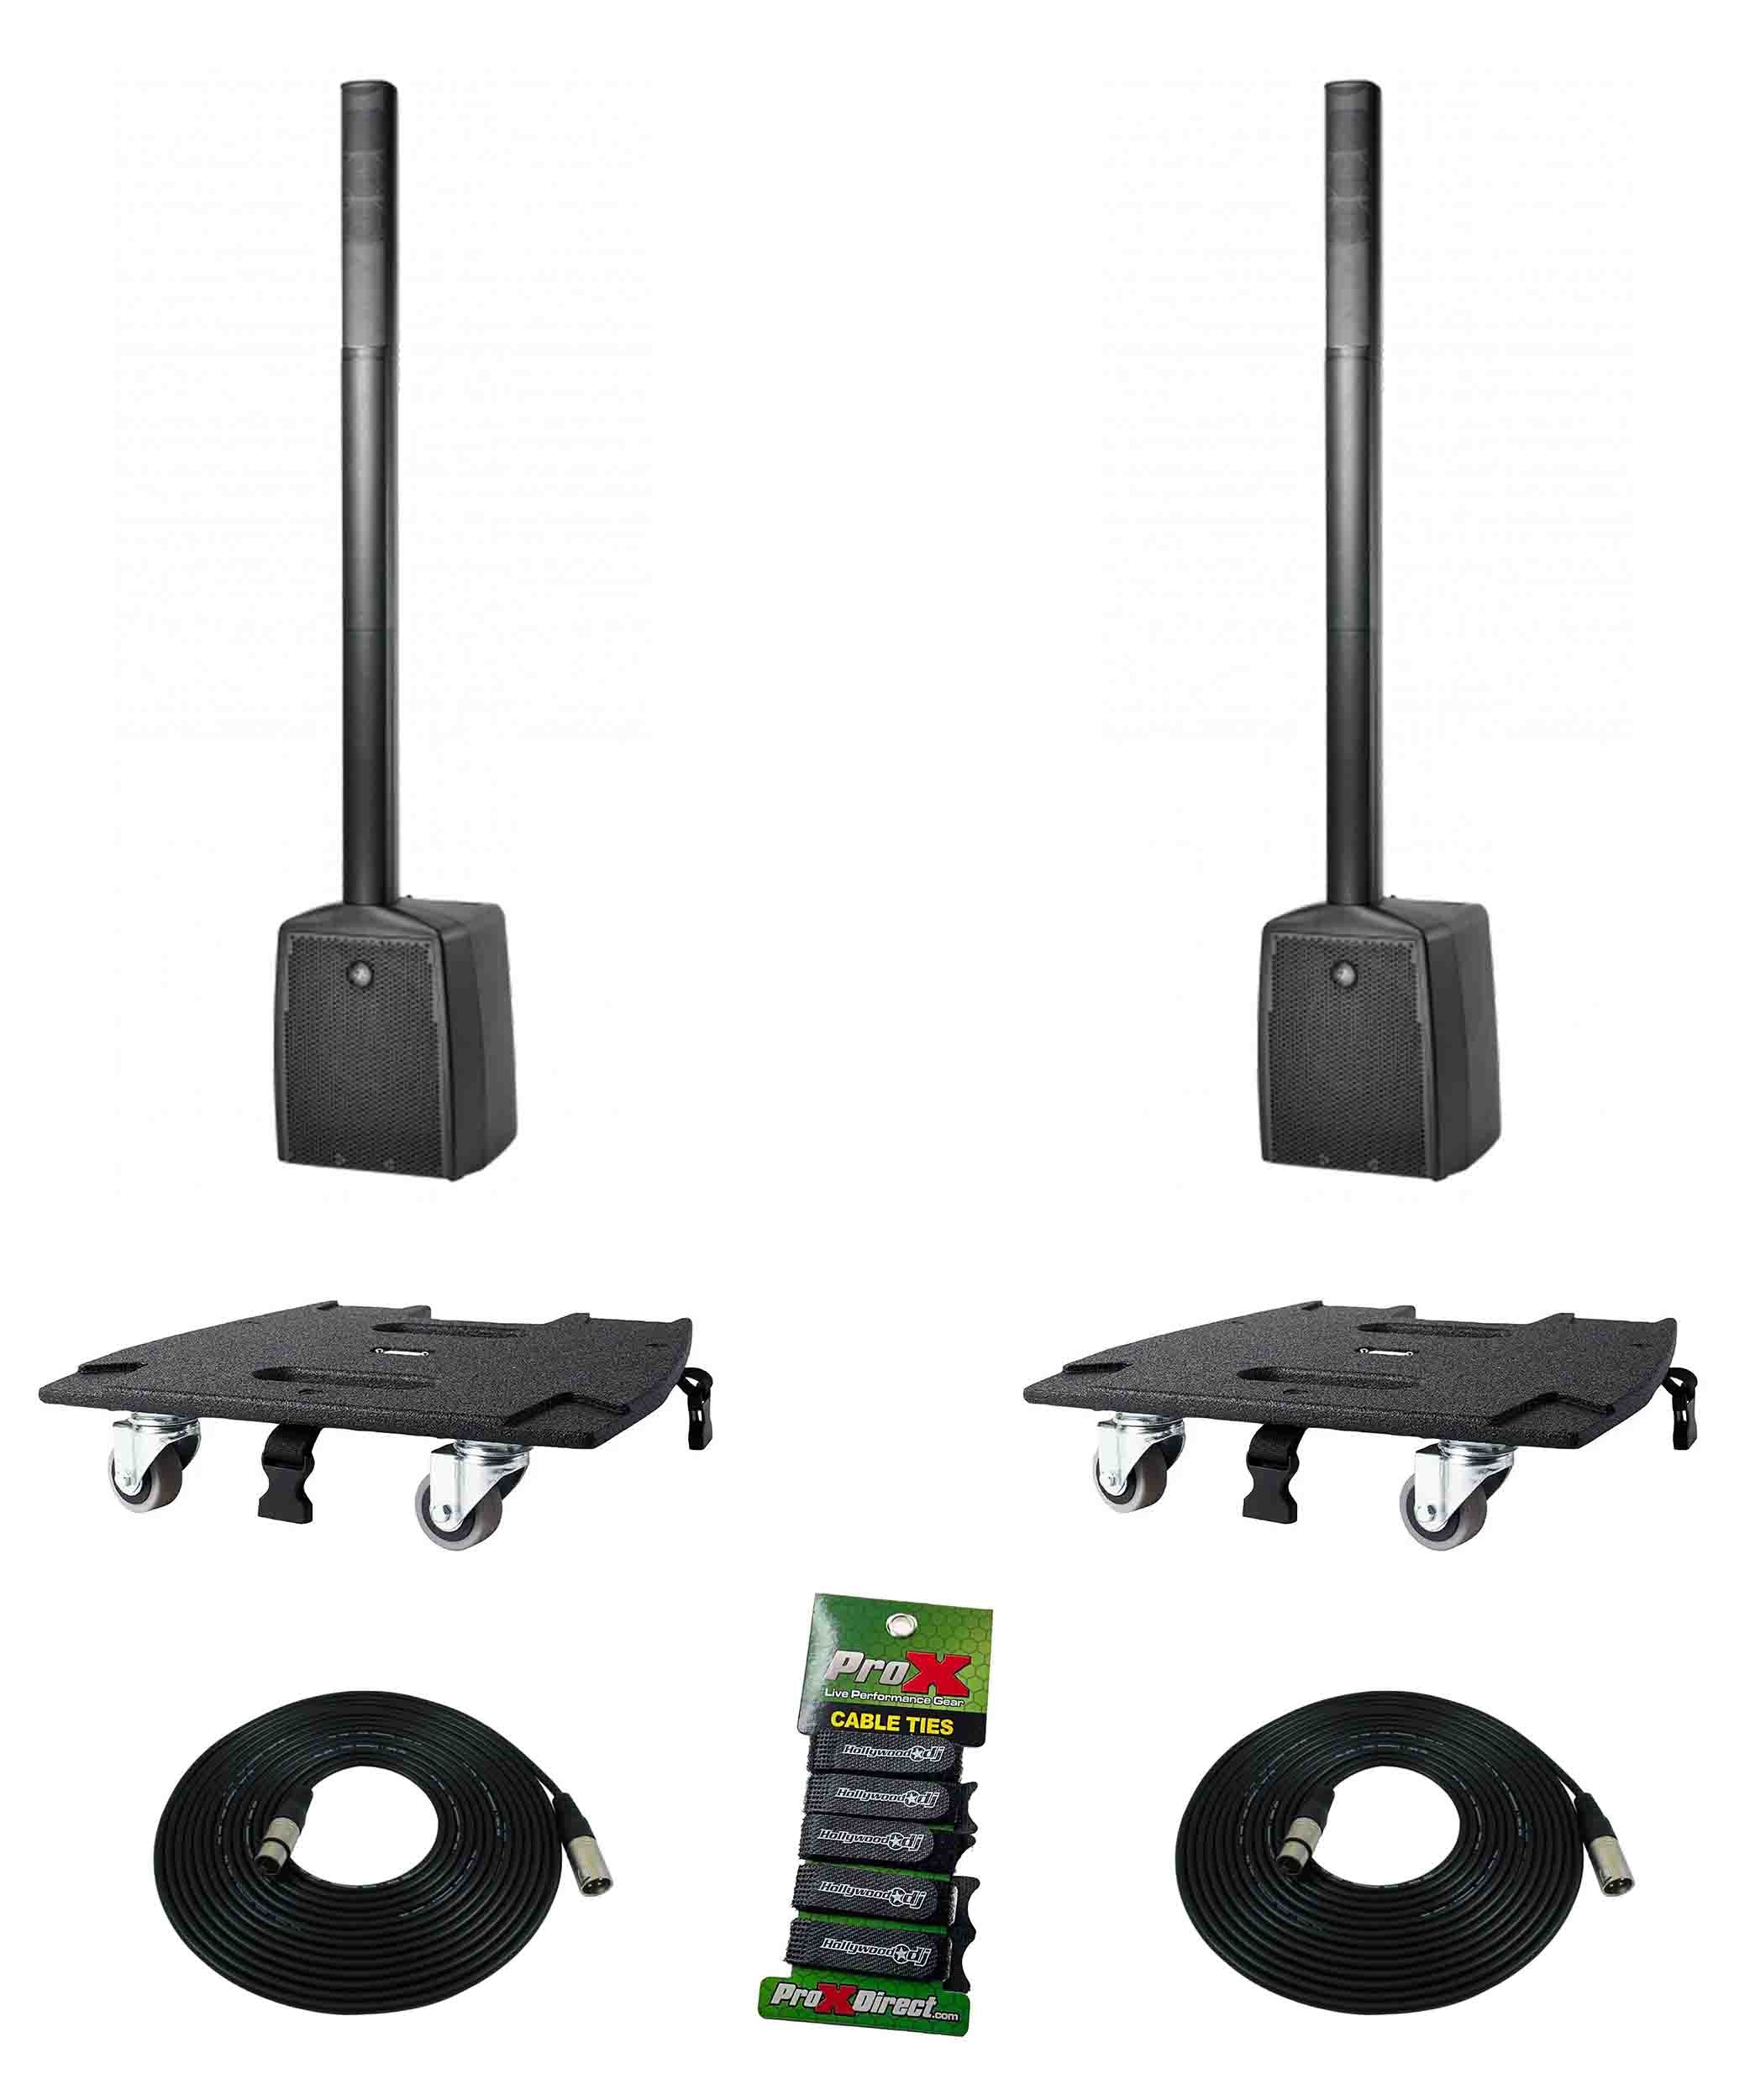 DAS Audio ALTEADUO10APLDUO, 3-Way Powered Portable Column System DJ Package with Transport Dolly by DAS Audio